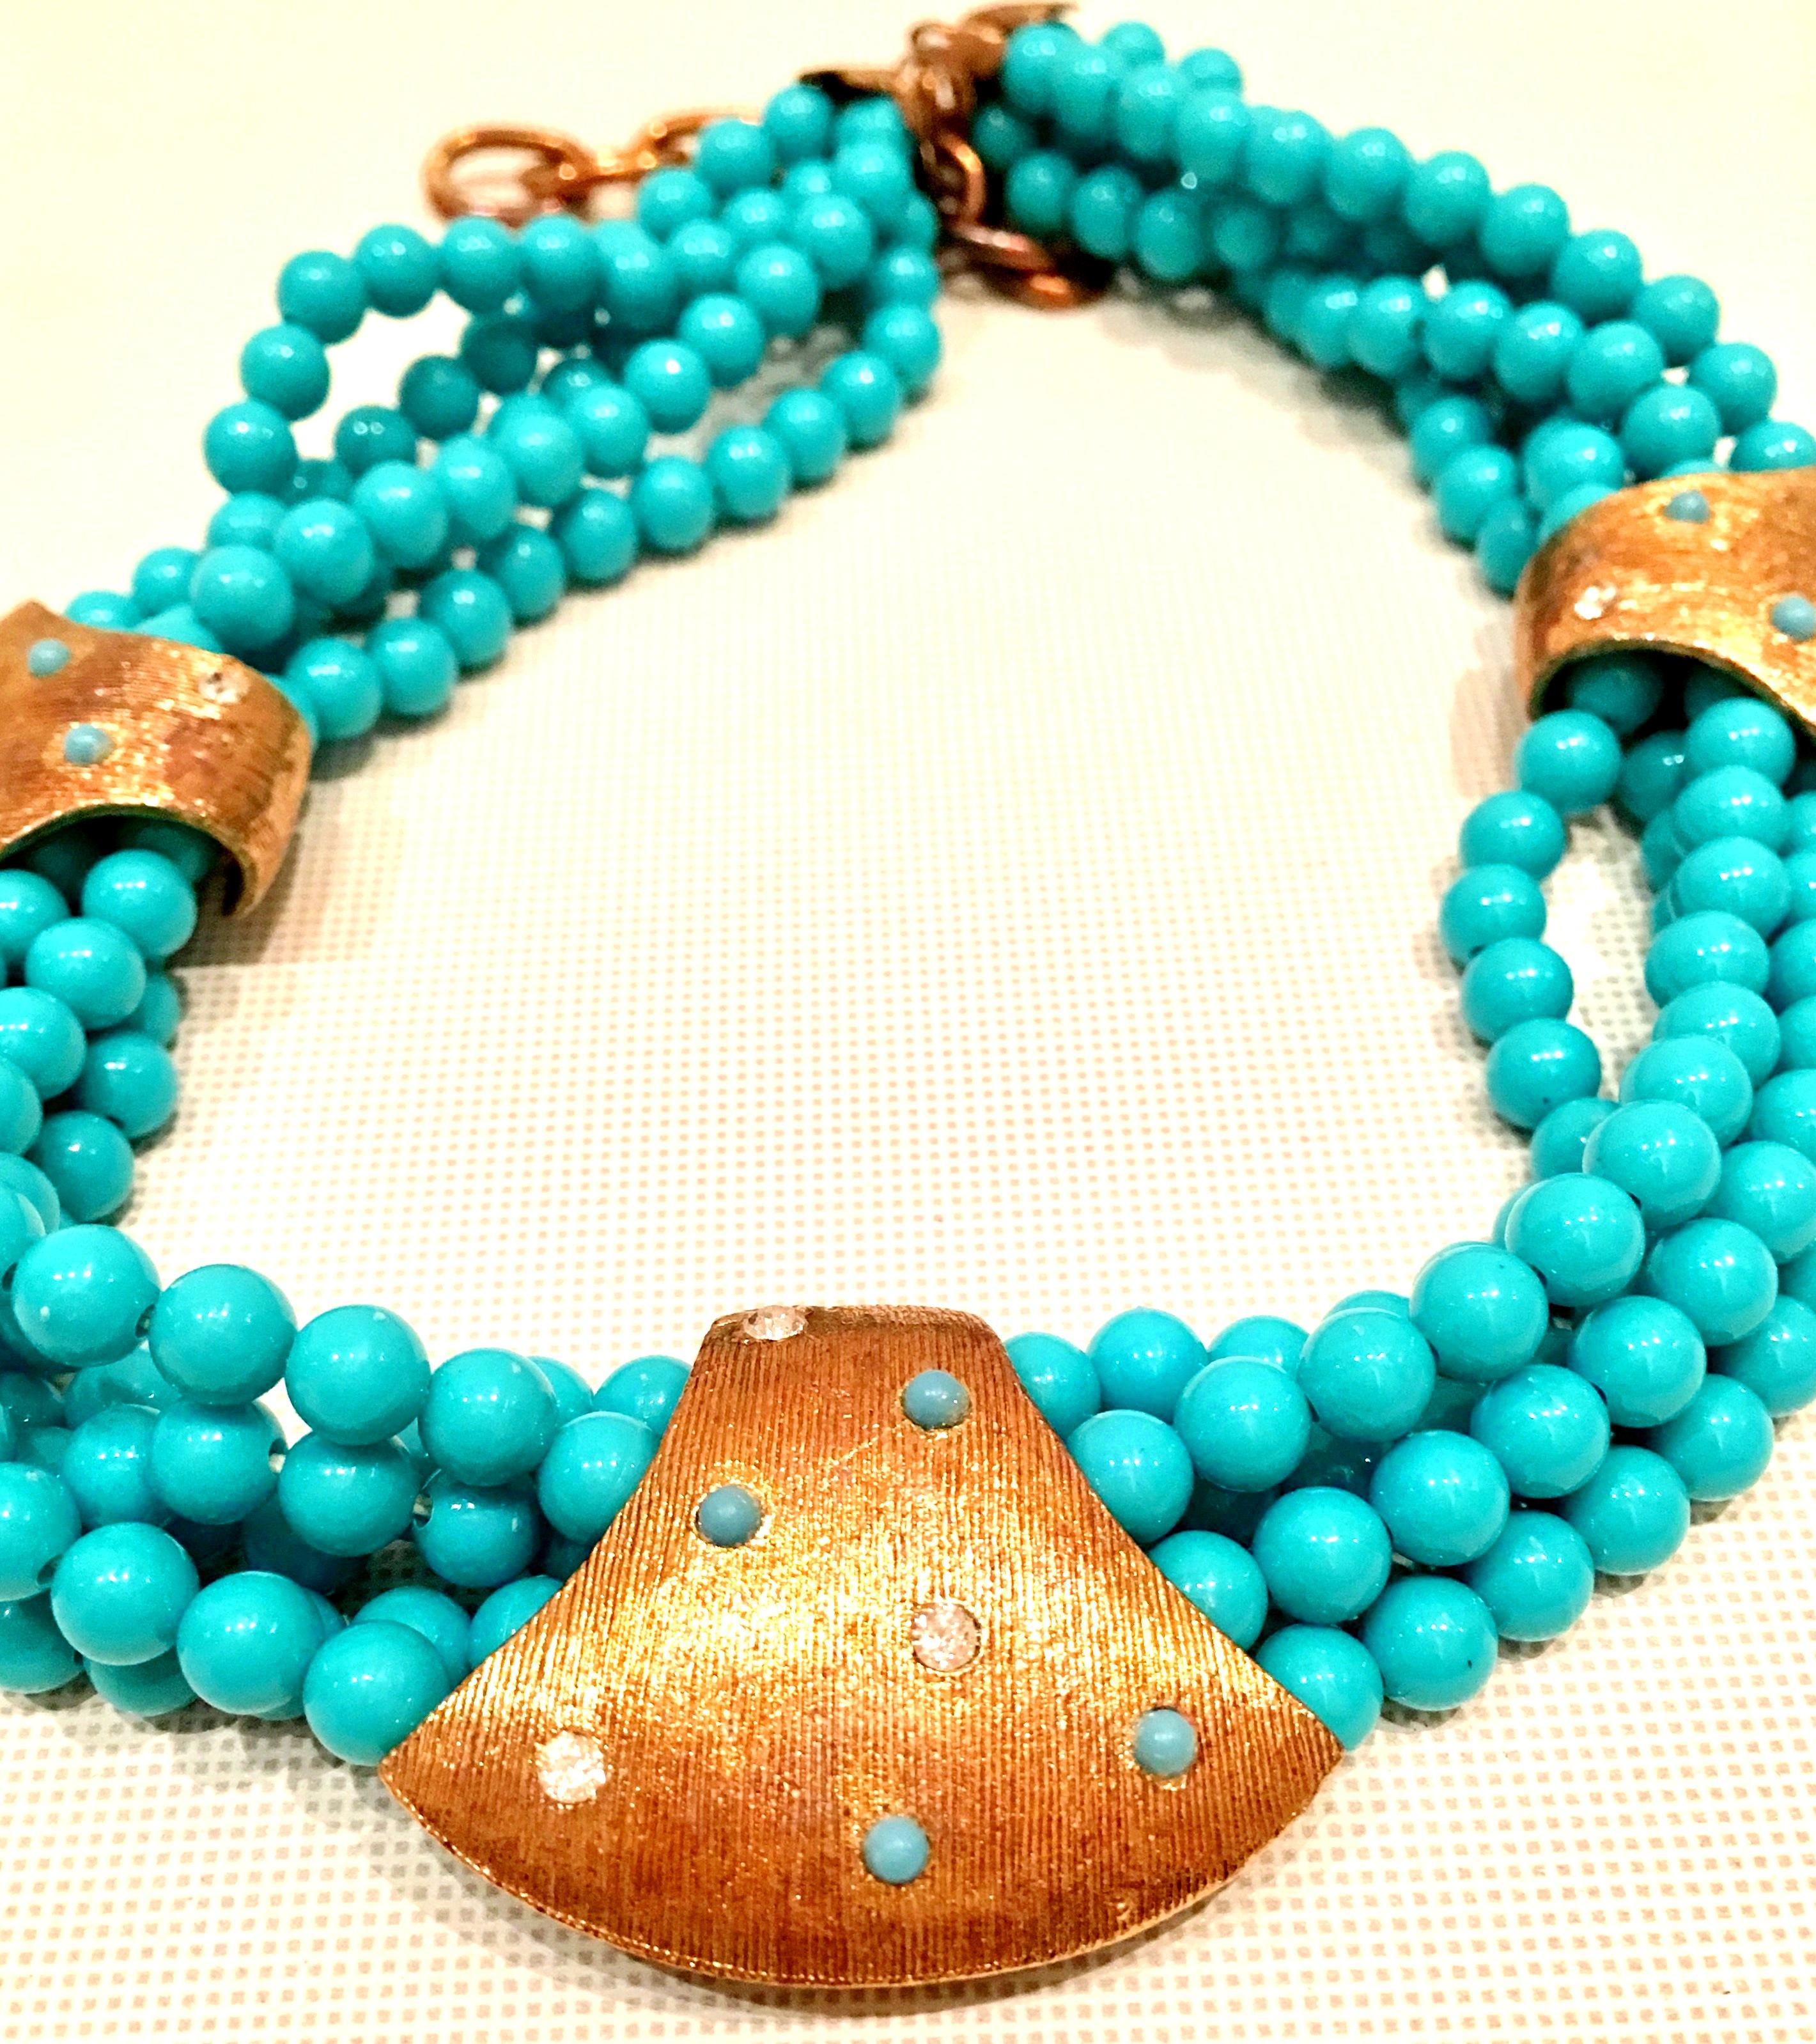 Women's 60'S Haskell Style Turquoise Bead & Swarovski Crystal Necklace & Earrings S/3